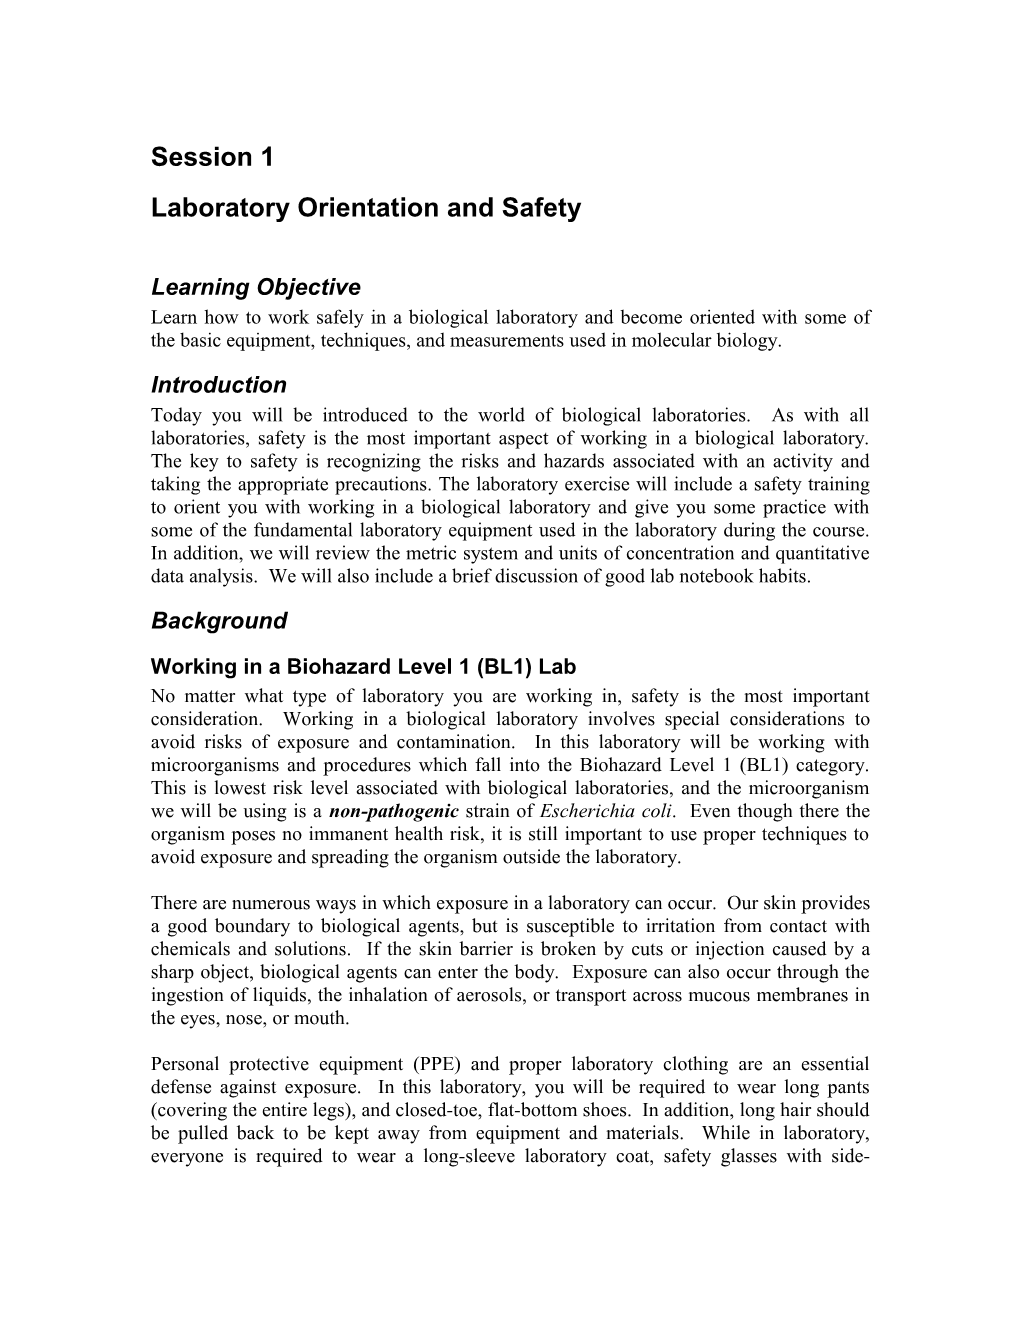 Laboratory Orientation and Safety